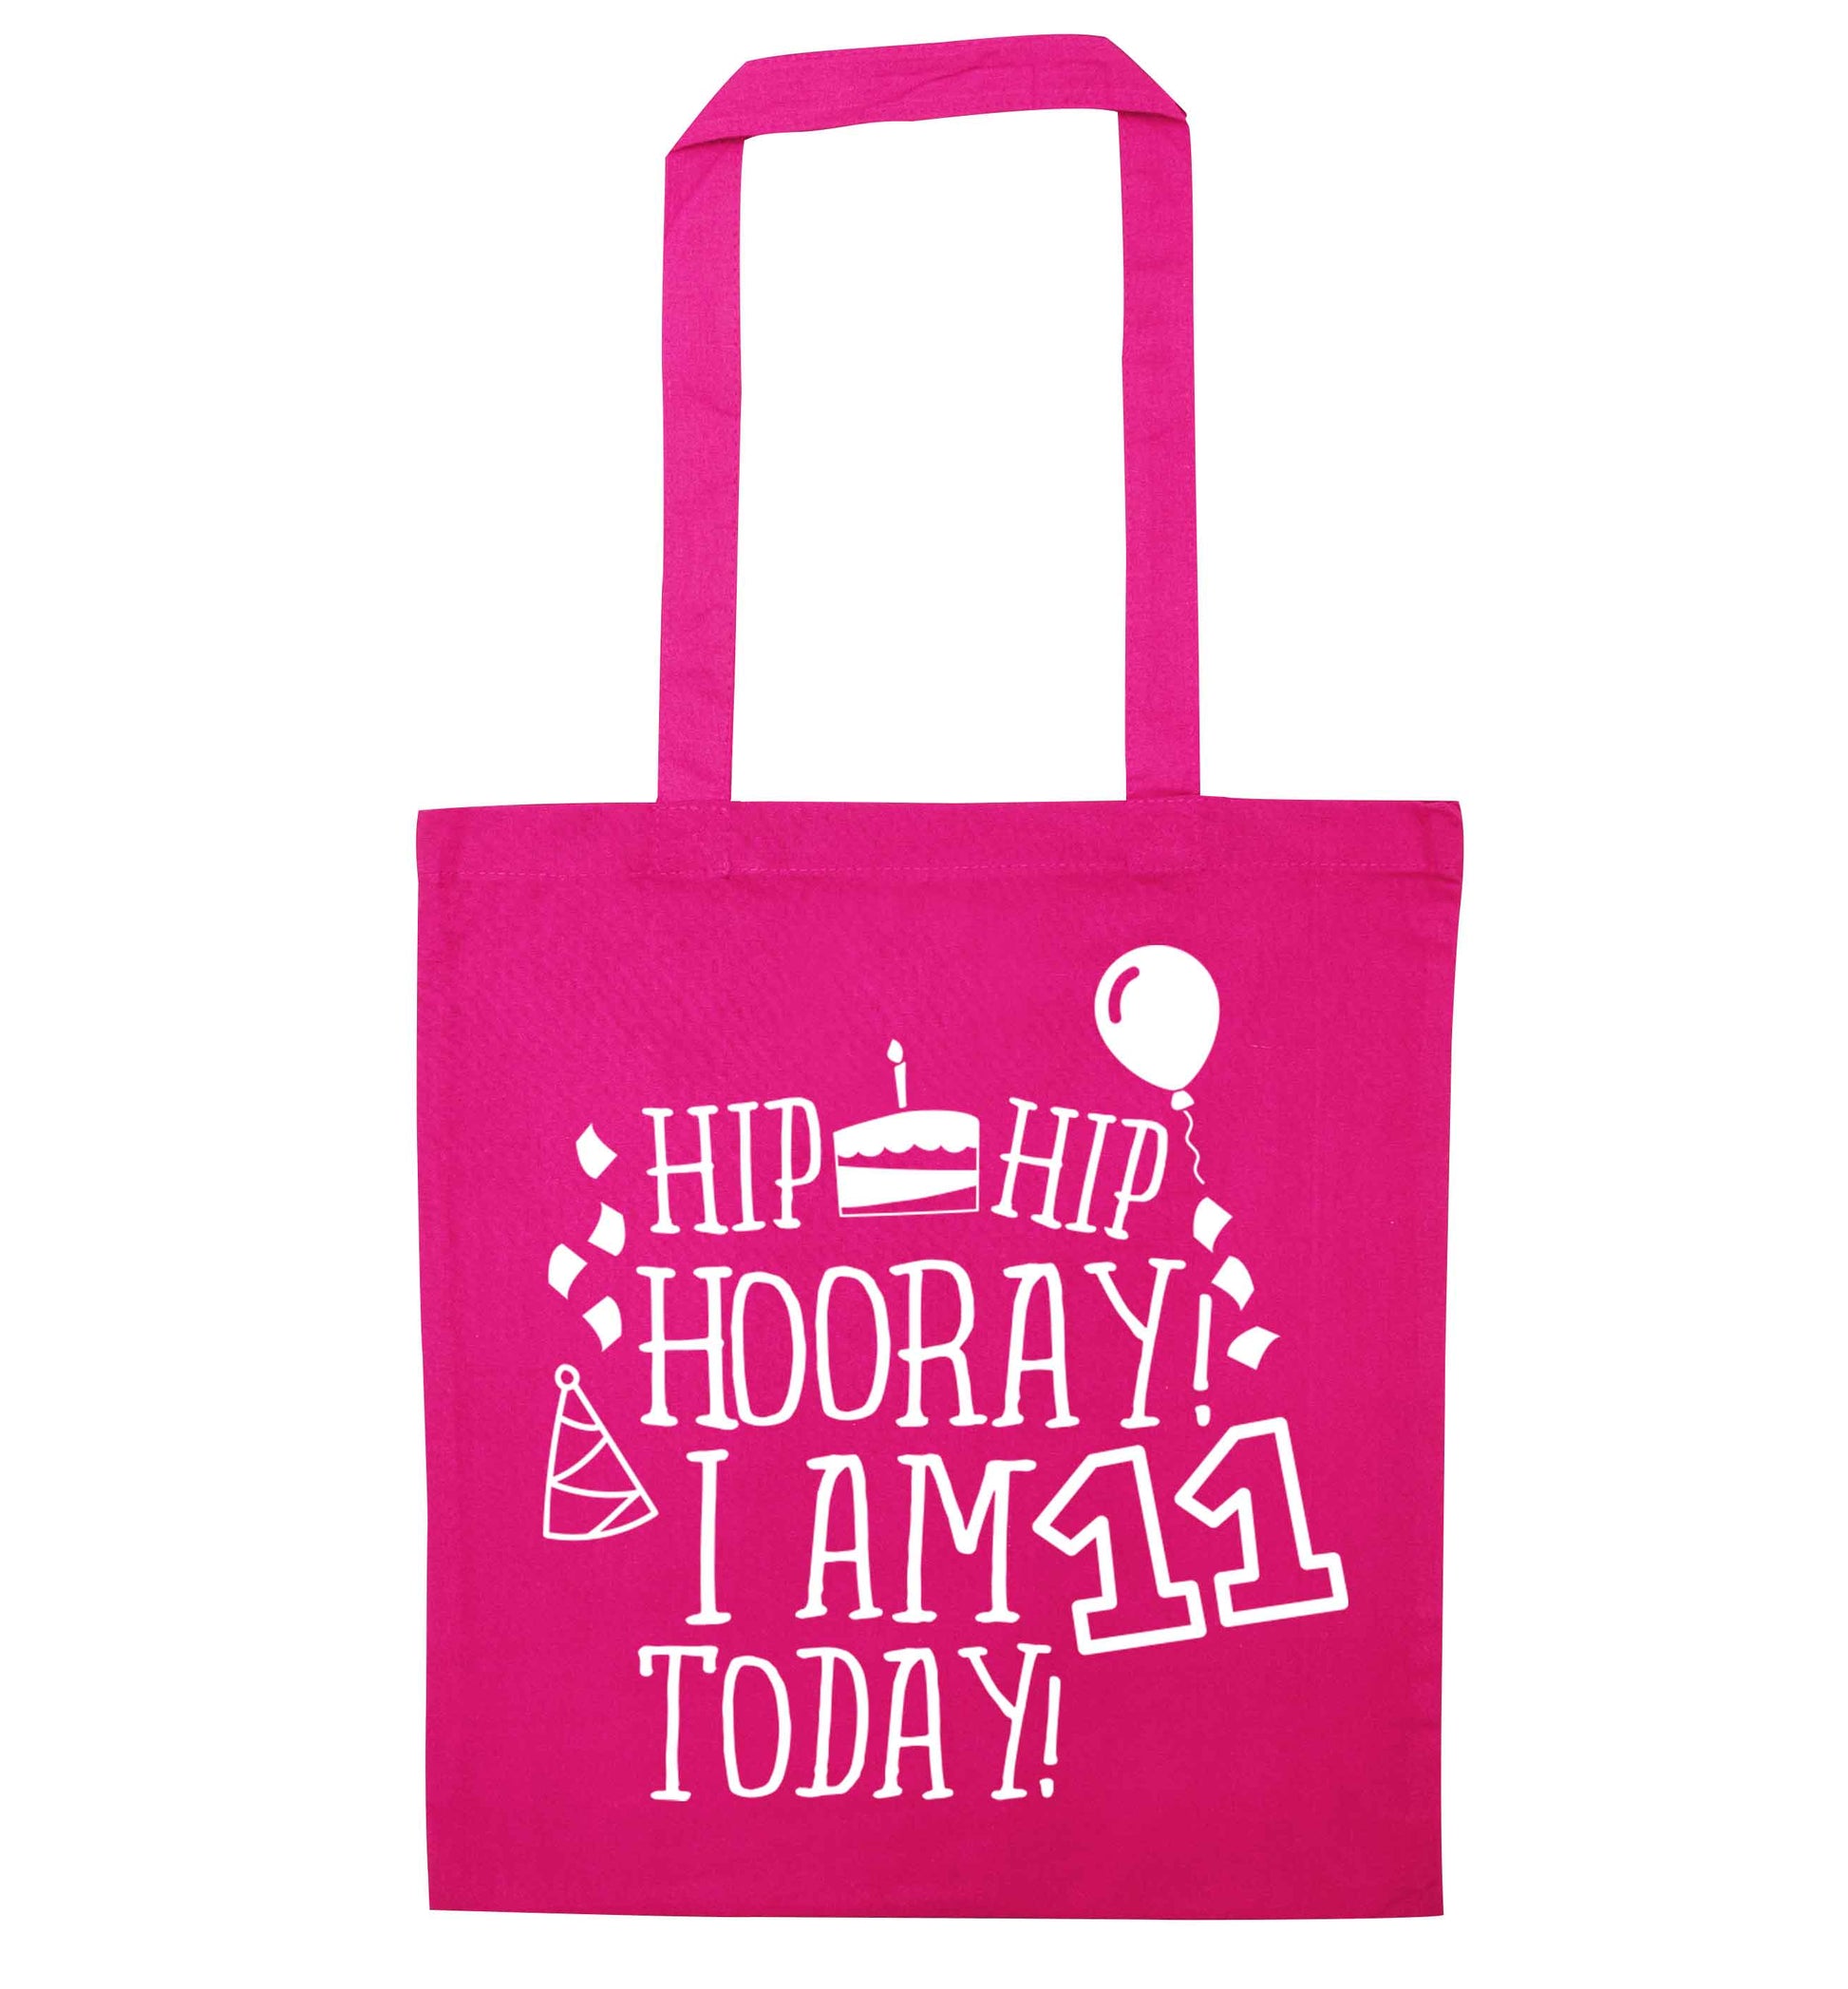 Hip hip hooray I am eleven today! pink tote bag